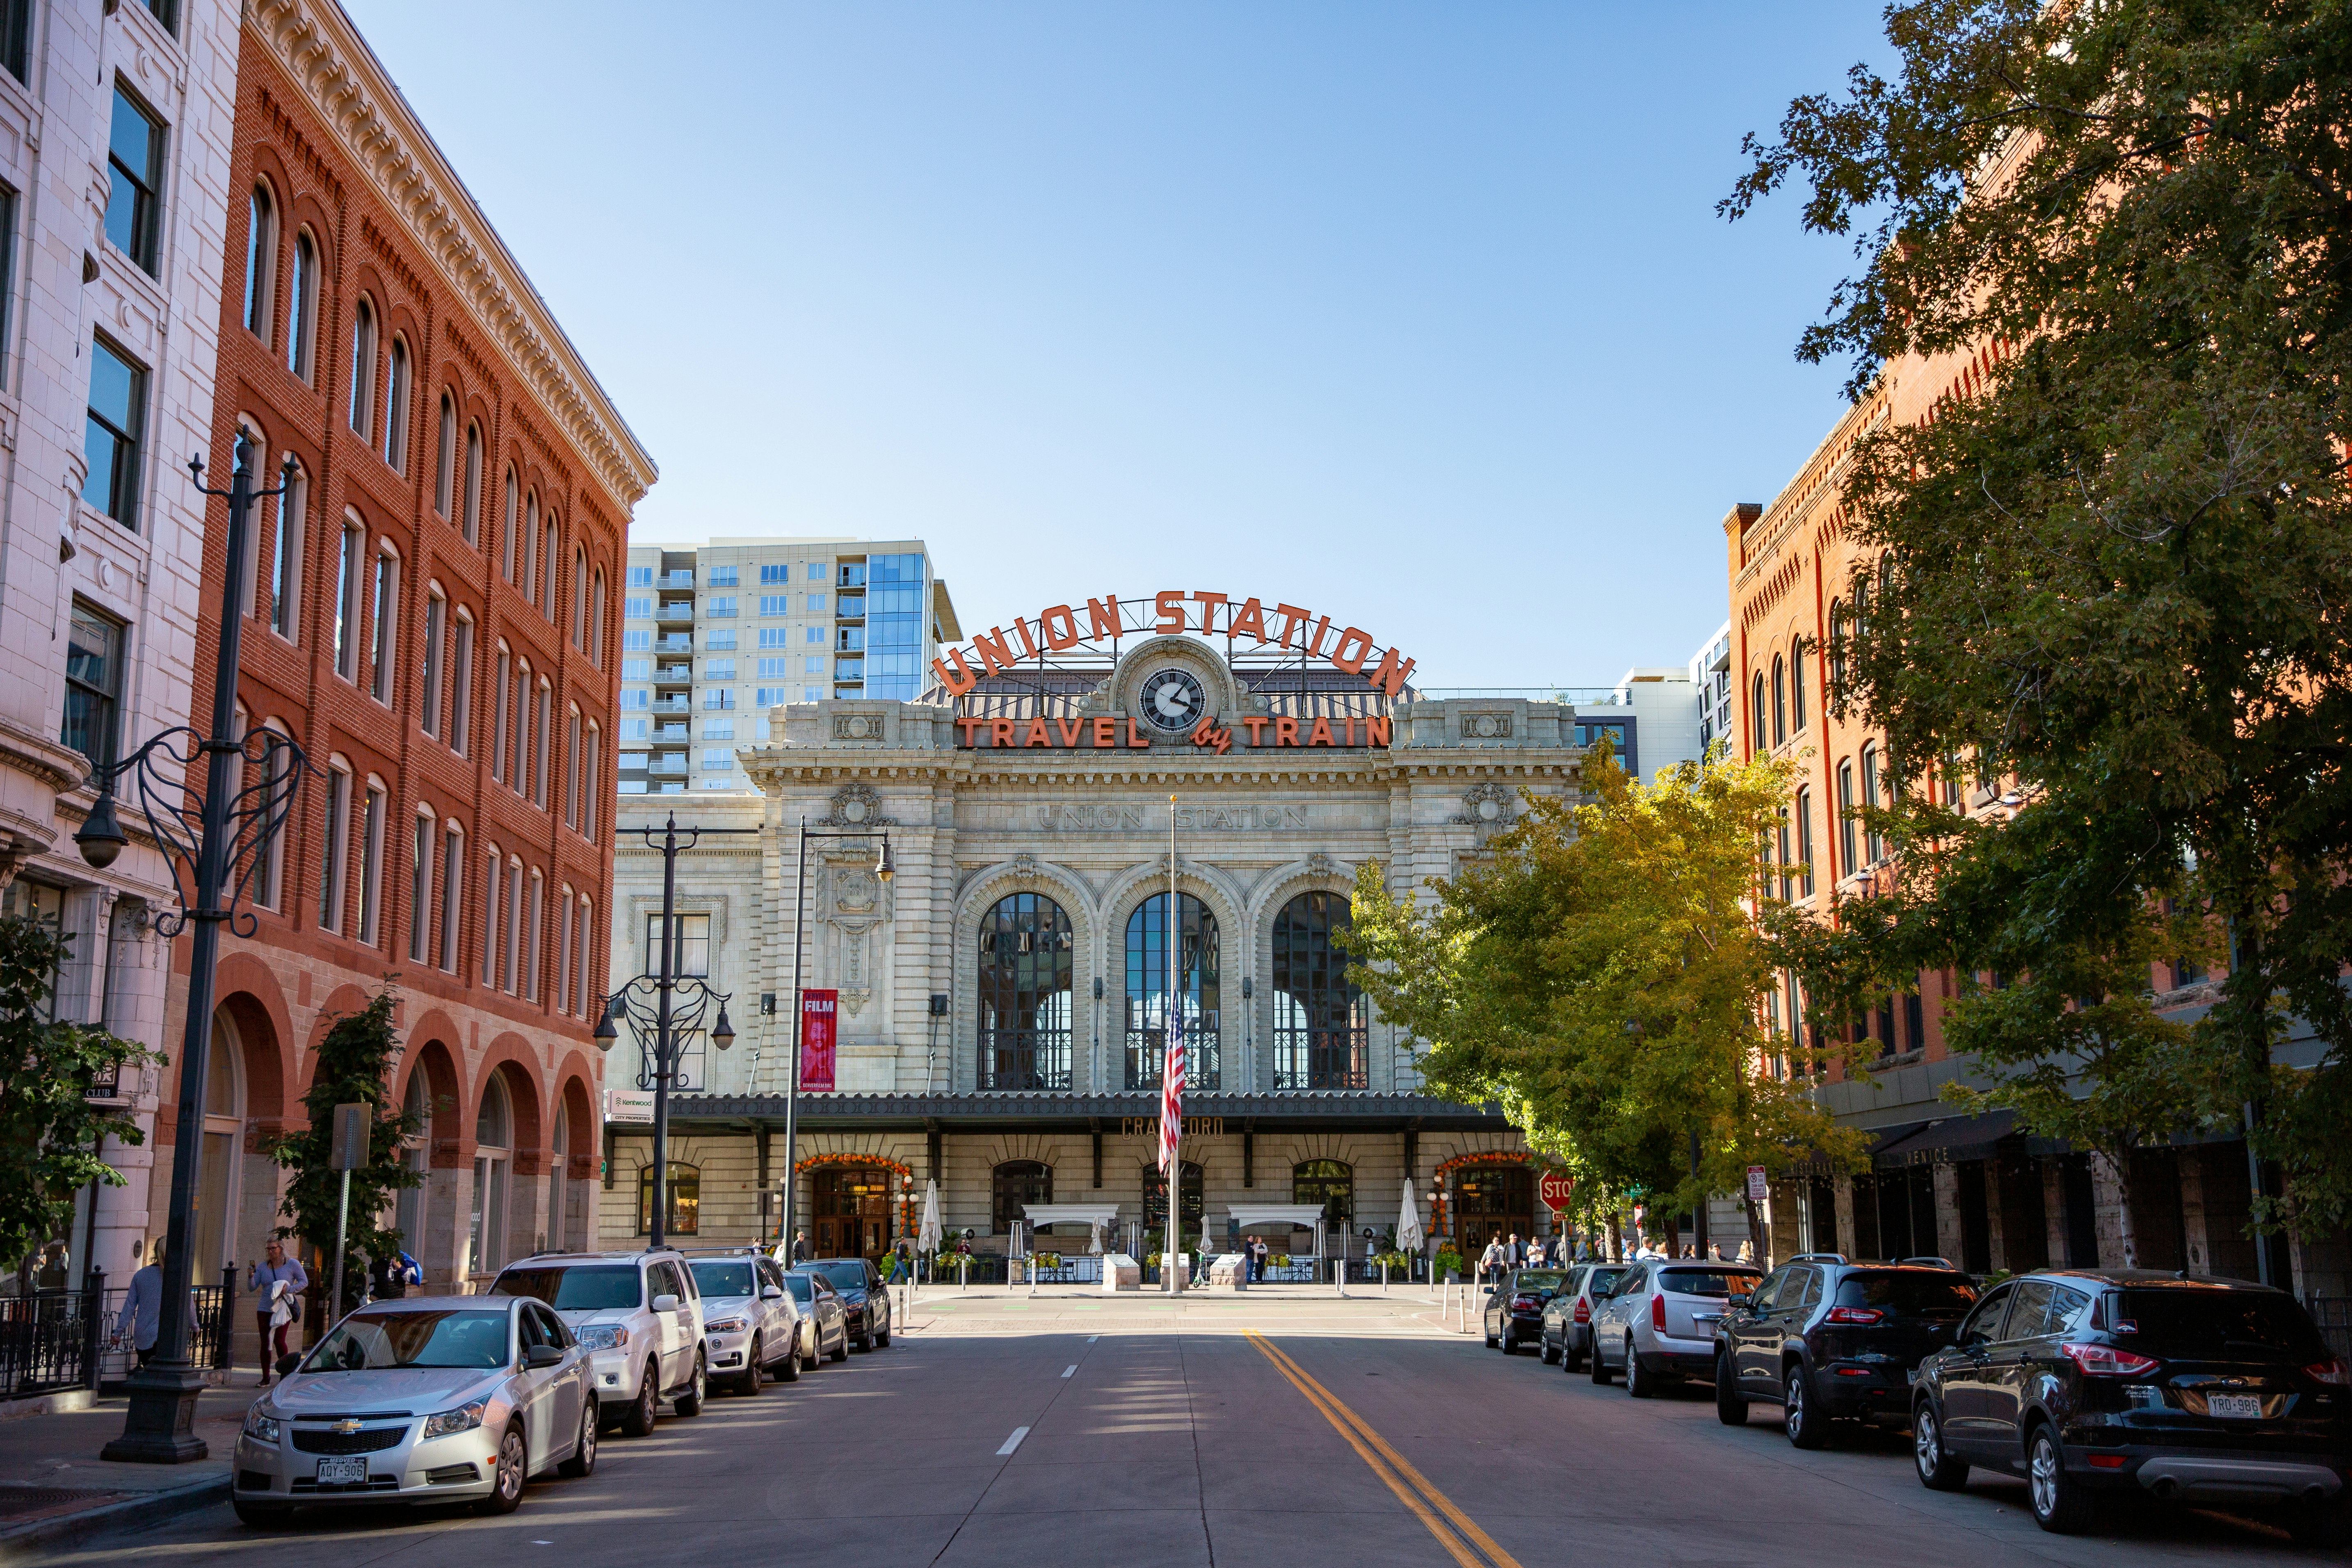 Brick buildings line a black paved street that dead ends in the stone facade of Union Station, which also features a white clock face and a bright red sign that reads "Union Station Travel By Train" 